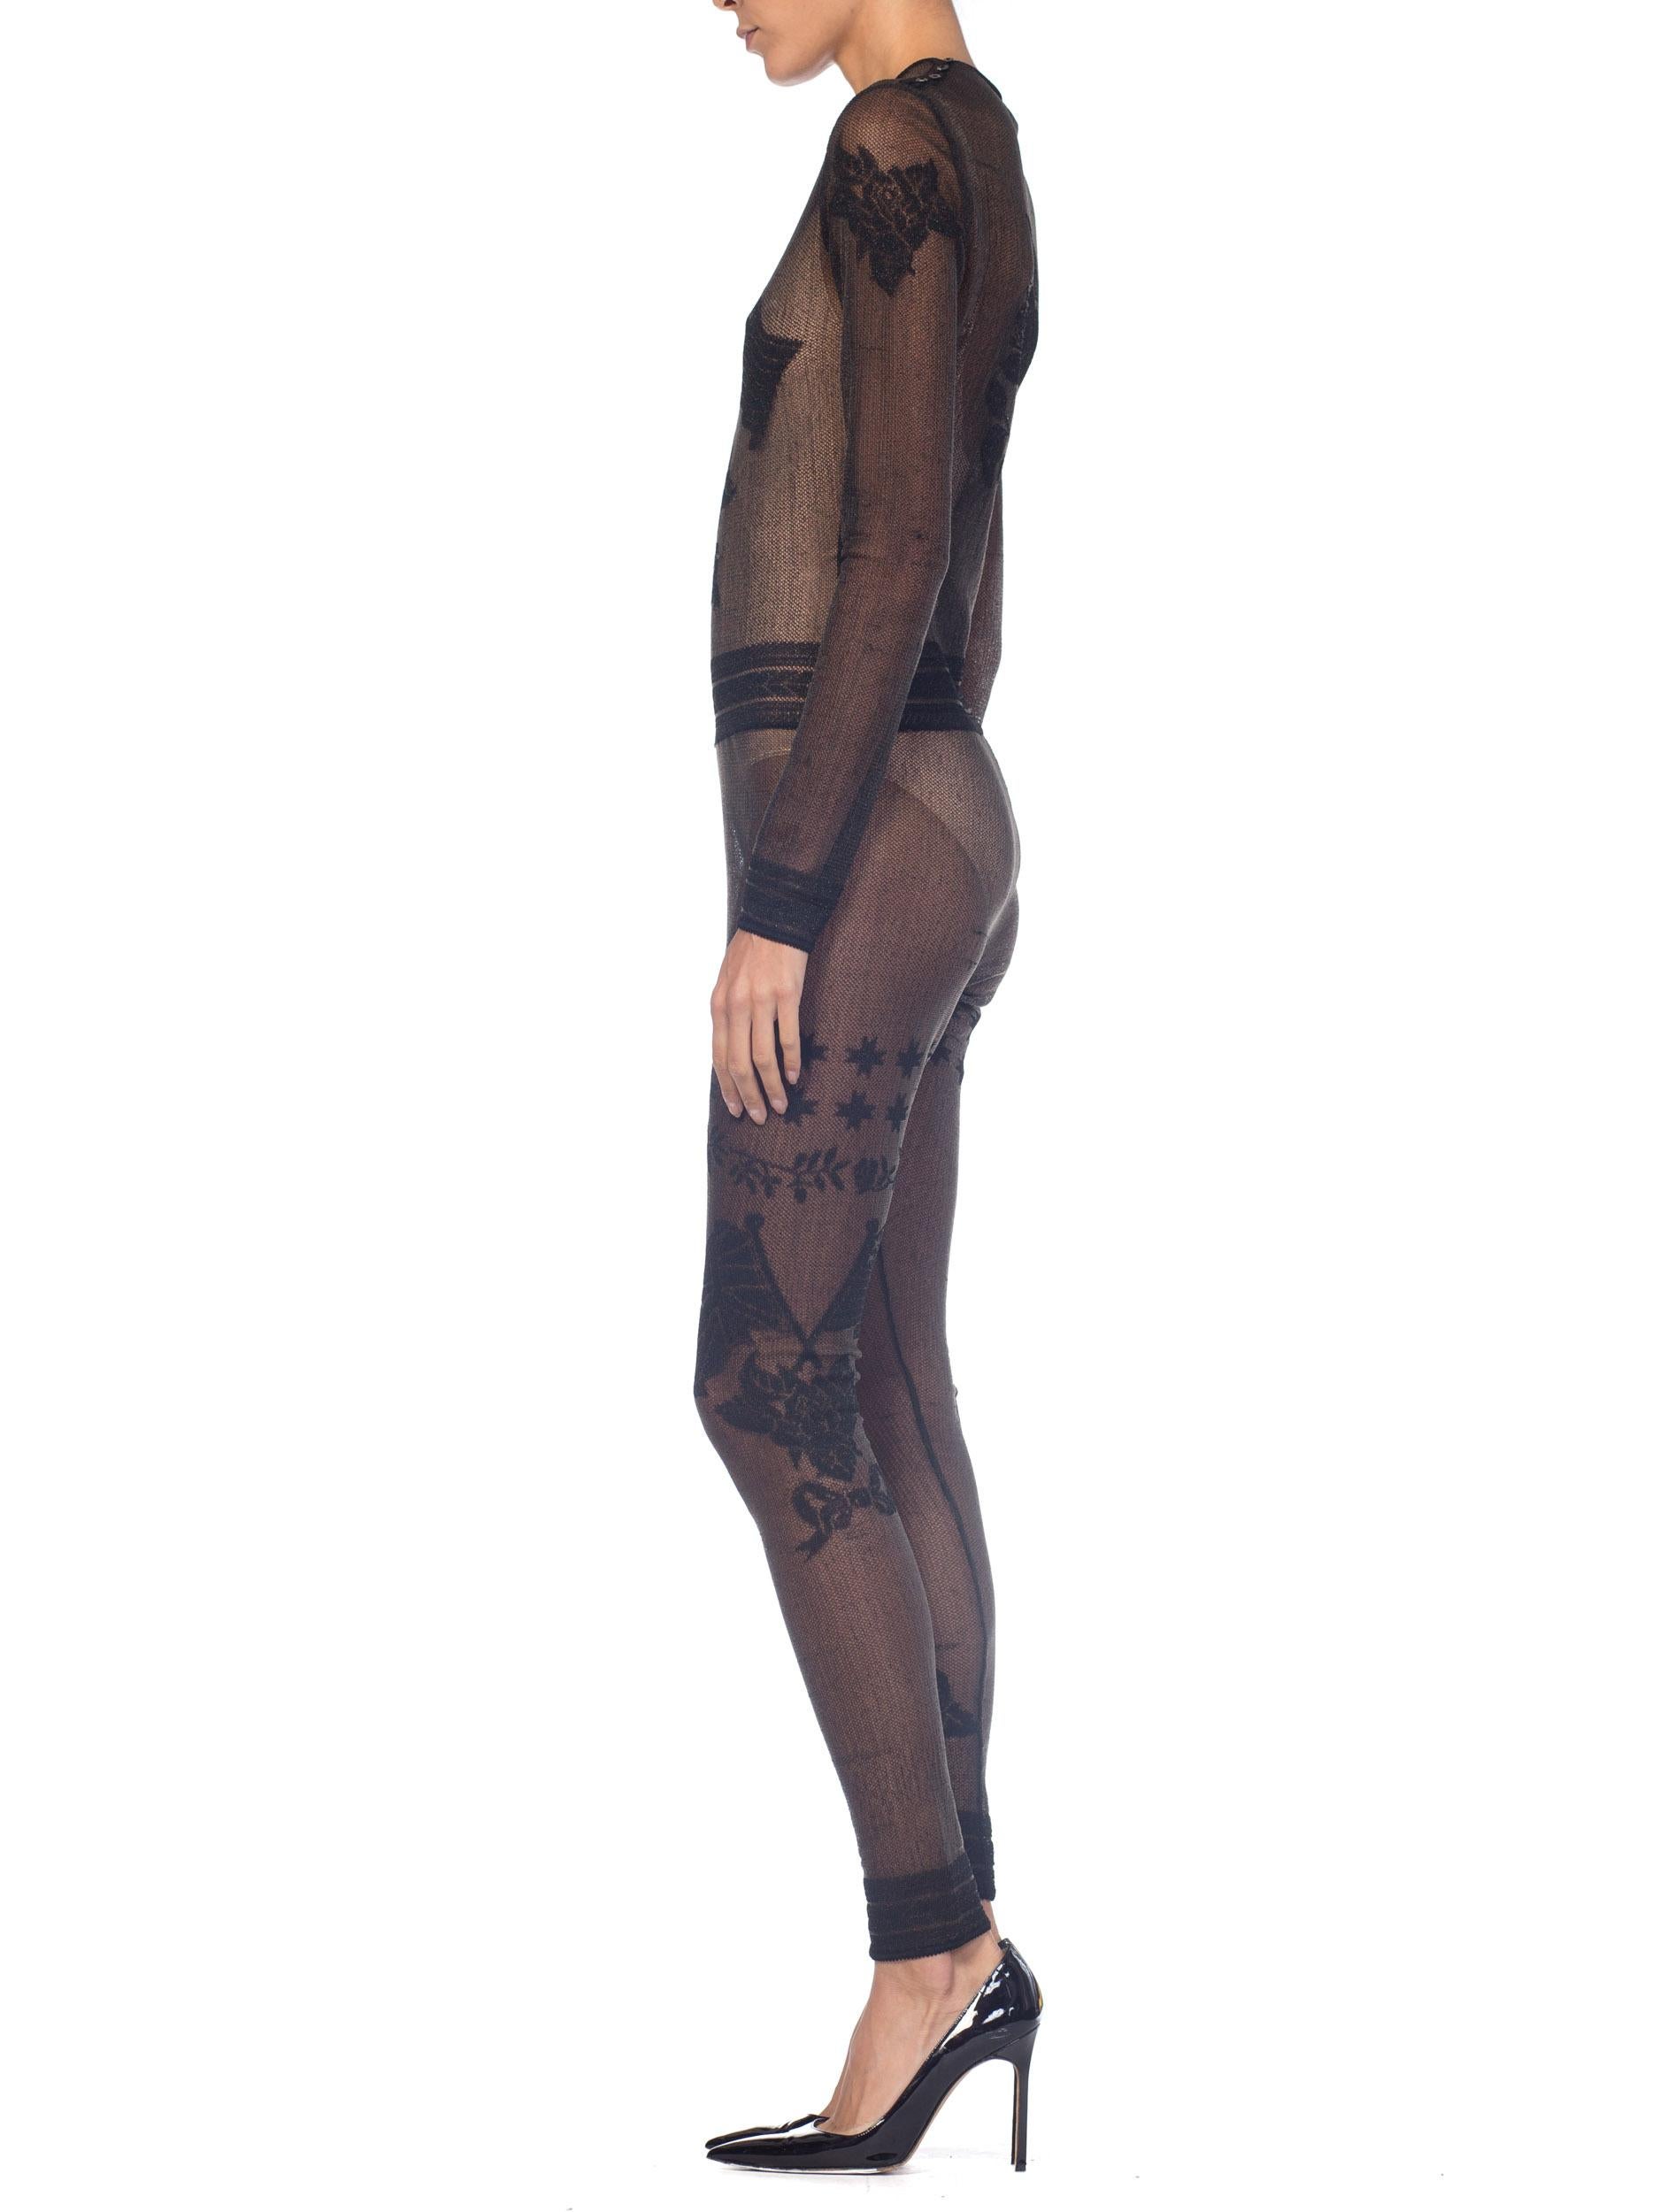 1990S JOHN GALLIANO Sheer Knit Bodysuit Jumpsuit From The Siouxsie Sphinx Colle 3